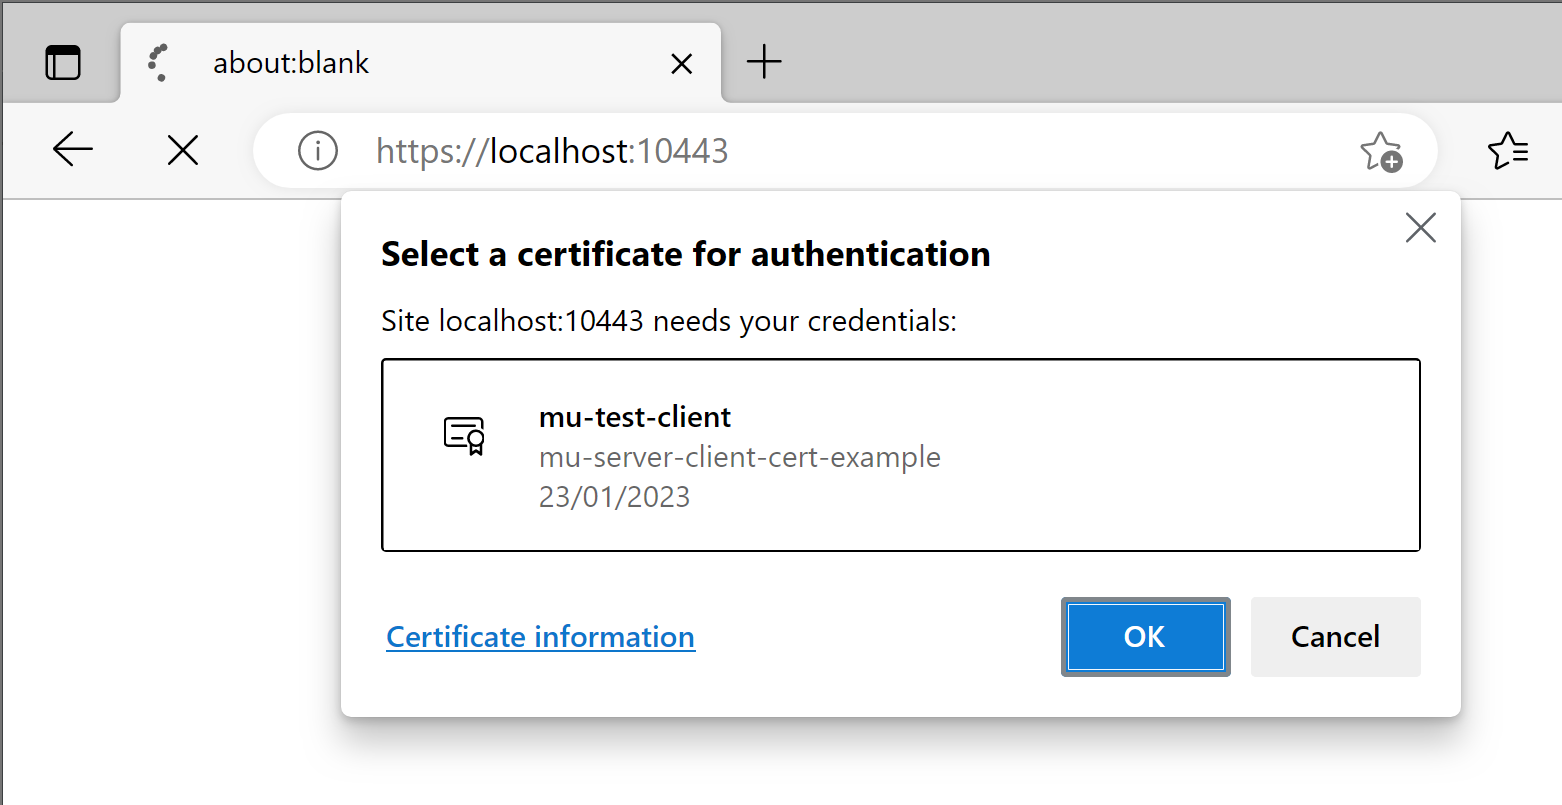 Prompt in Microsoft Edge asking which client certificate to send